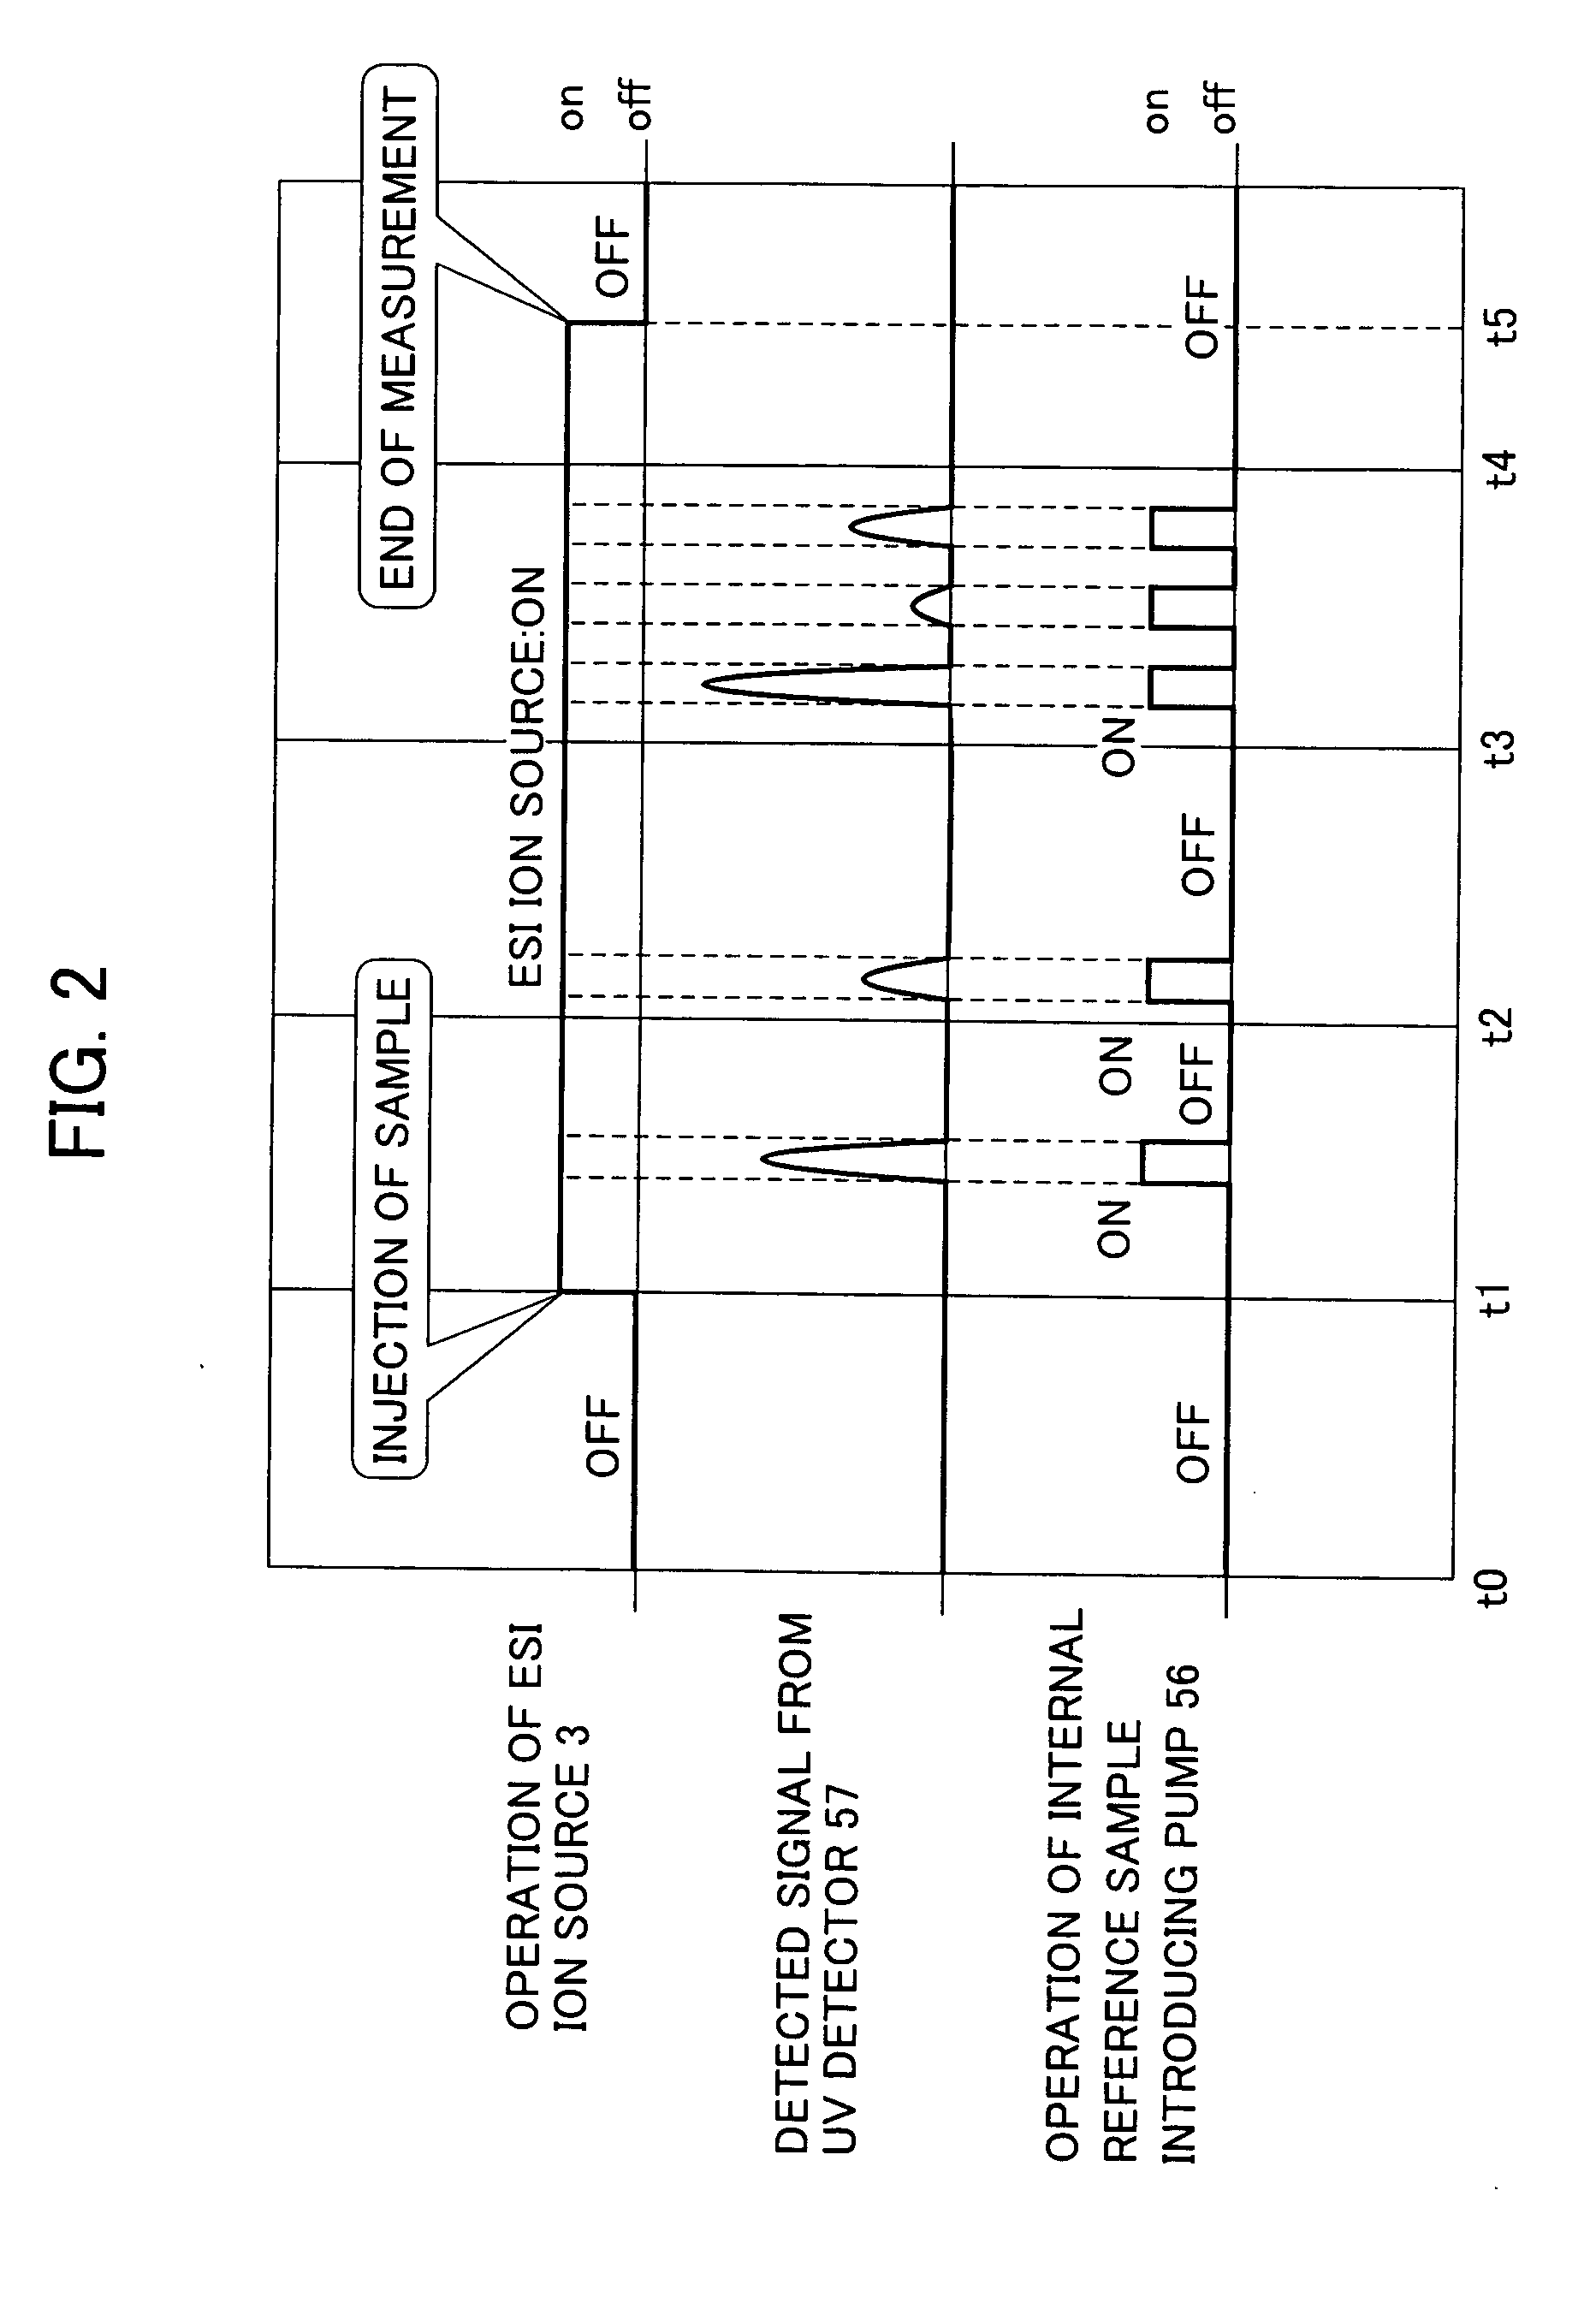 Ion trap/time-of-flight mass spectrometer and method of measuring ion accurate mass